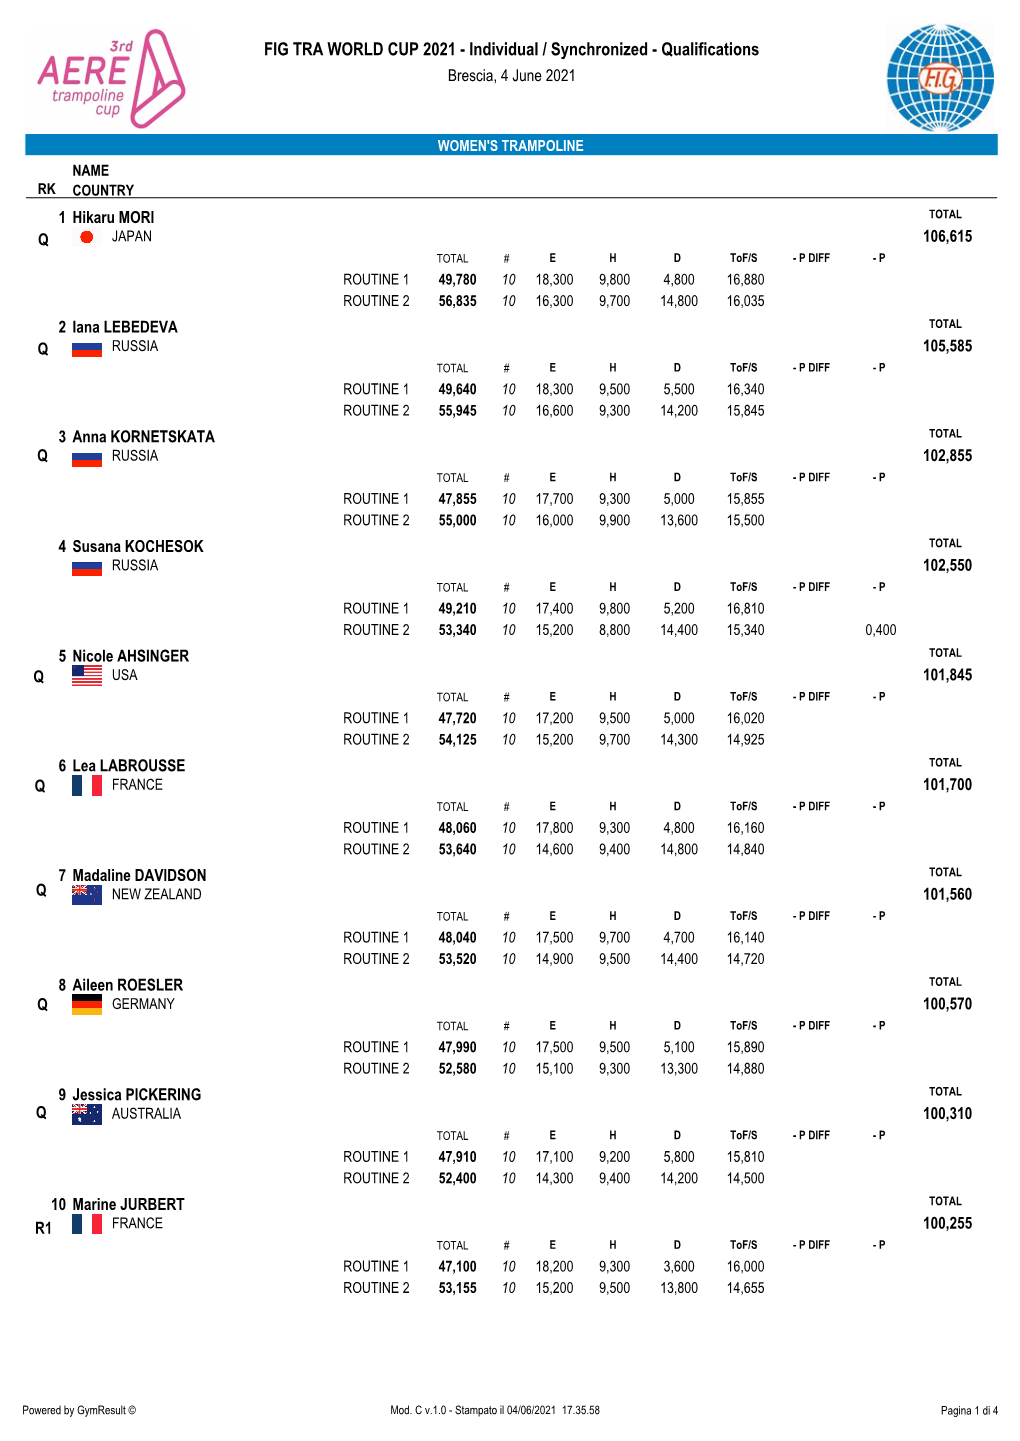 FIG TRA WORLD CUP 2021 - Individual / Synchronized - Qualifications Brescia, 4 June 2021